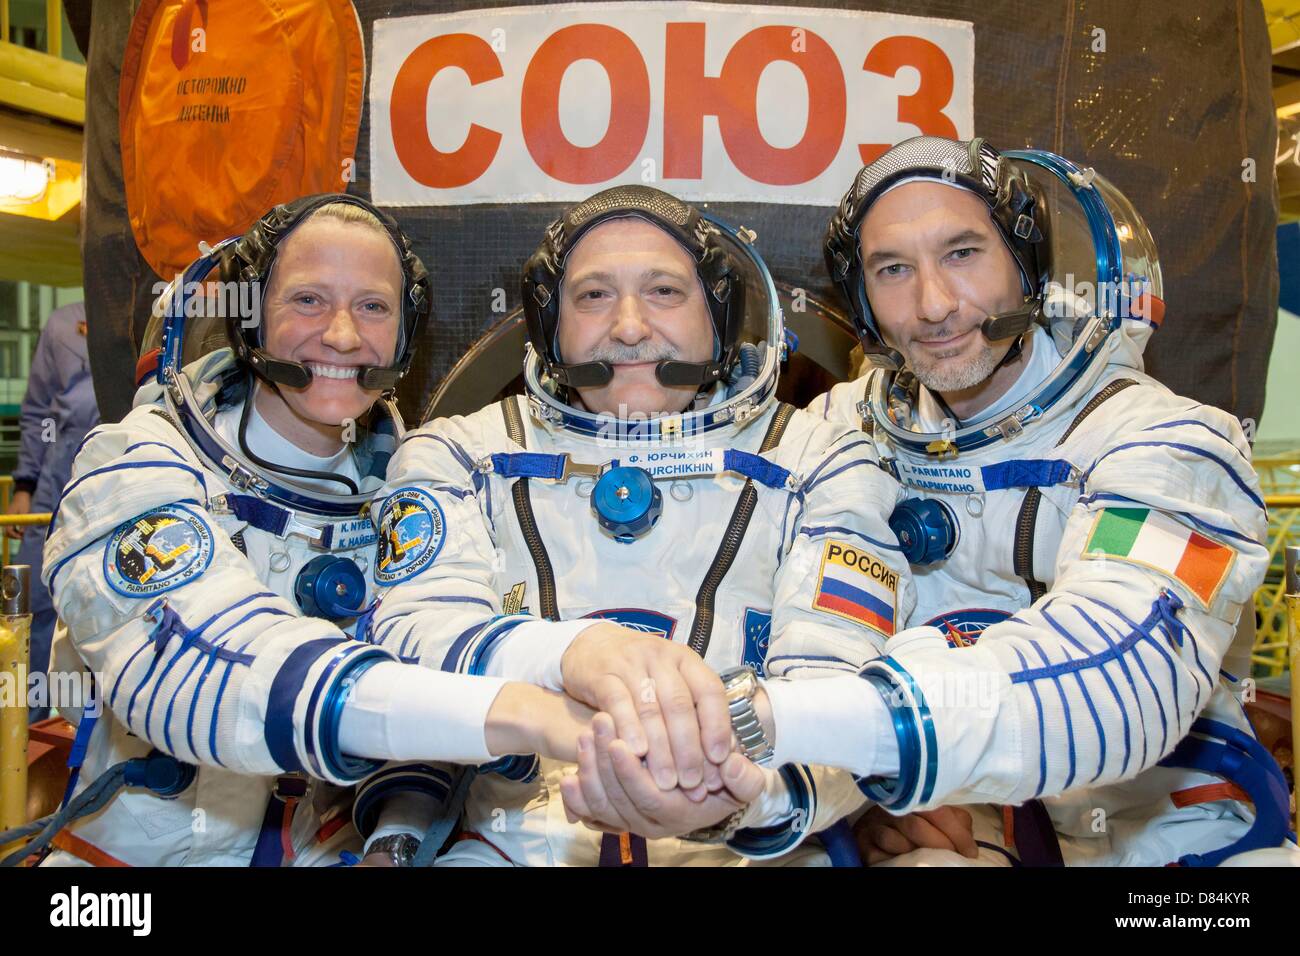 NASA astronaut Karen Nyberg, left, Soyuz Commander Fyodor Yurchikhin, center, and European Space Agency astronaut Luca Parmitano pose for pictures in their Sokol spacesuits during the fit check exercise at the Integration Facility in the Baikonur Cosmodrome May 17, 2013 in Baikonur, Kazakhstan. Parmitano along with NASA astronaut Karen Nyberg and Soyuz Commander Fyodor Yurchikhin will launch May 29 as Expedition crew 36/37 to the International Space Station. Stock Photo